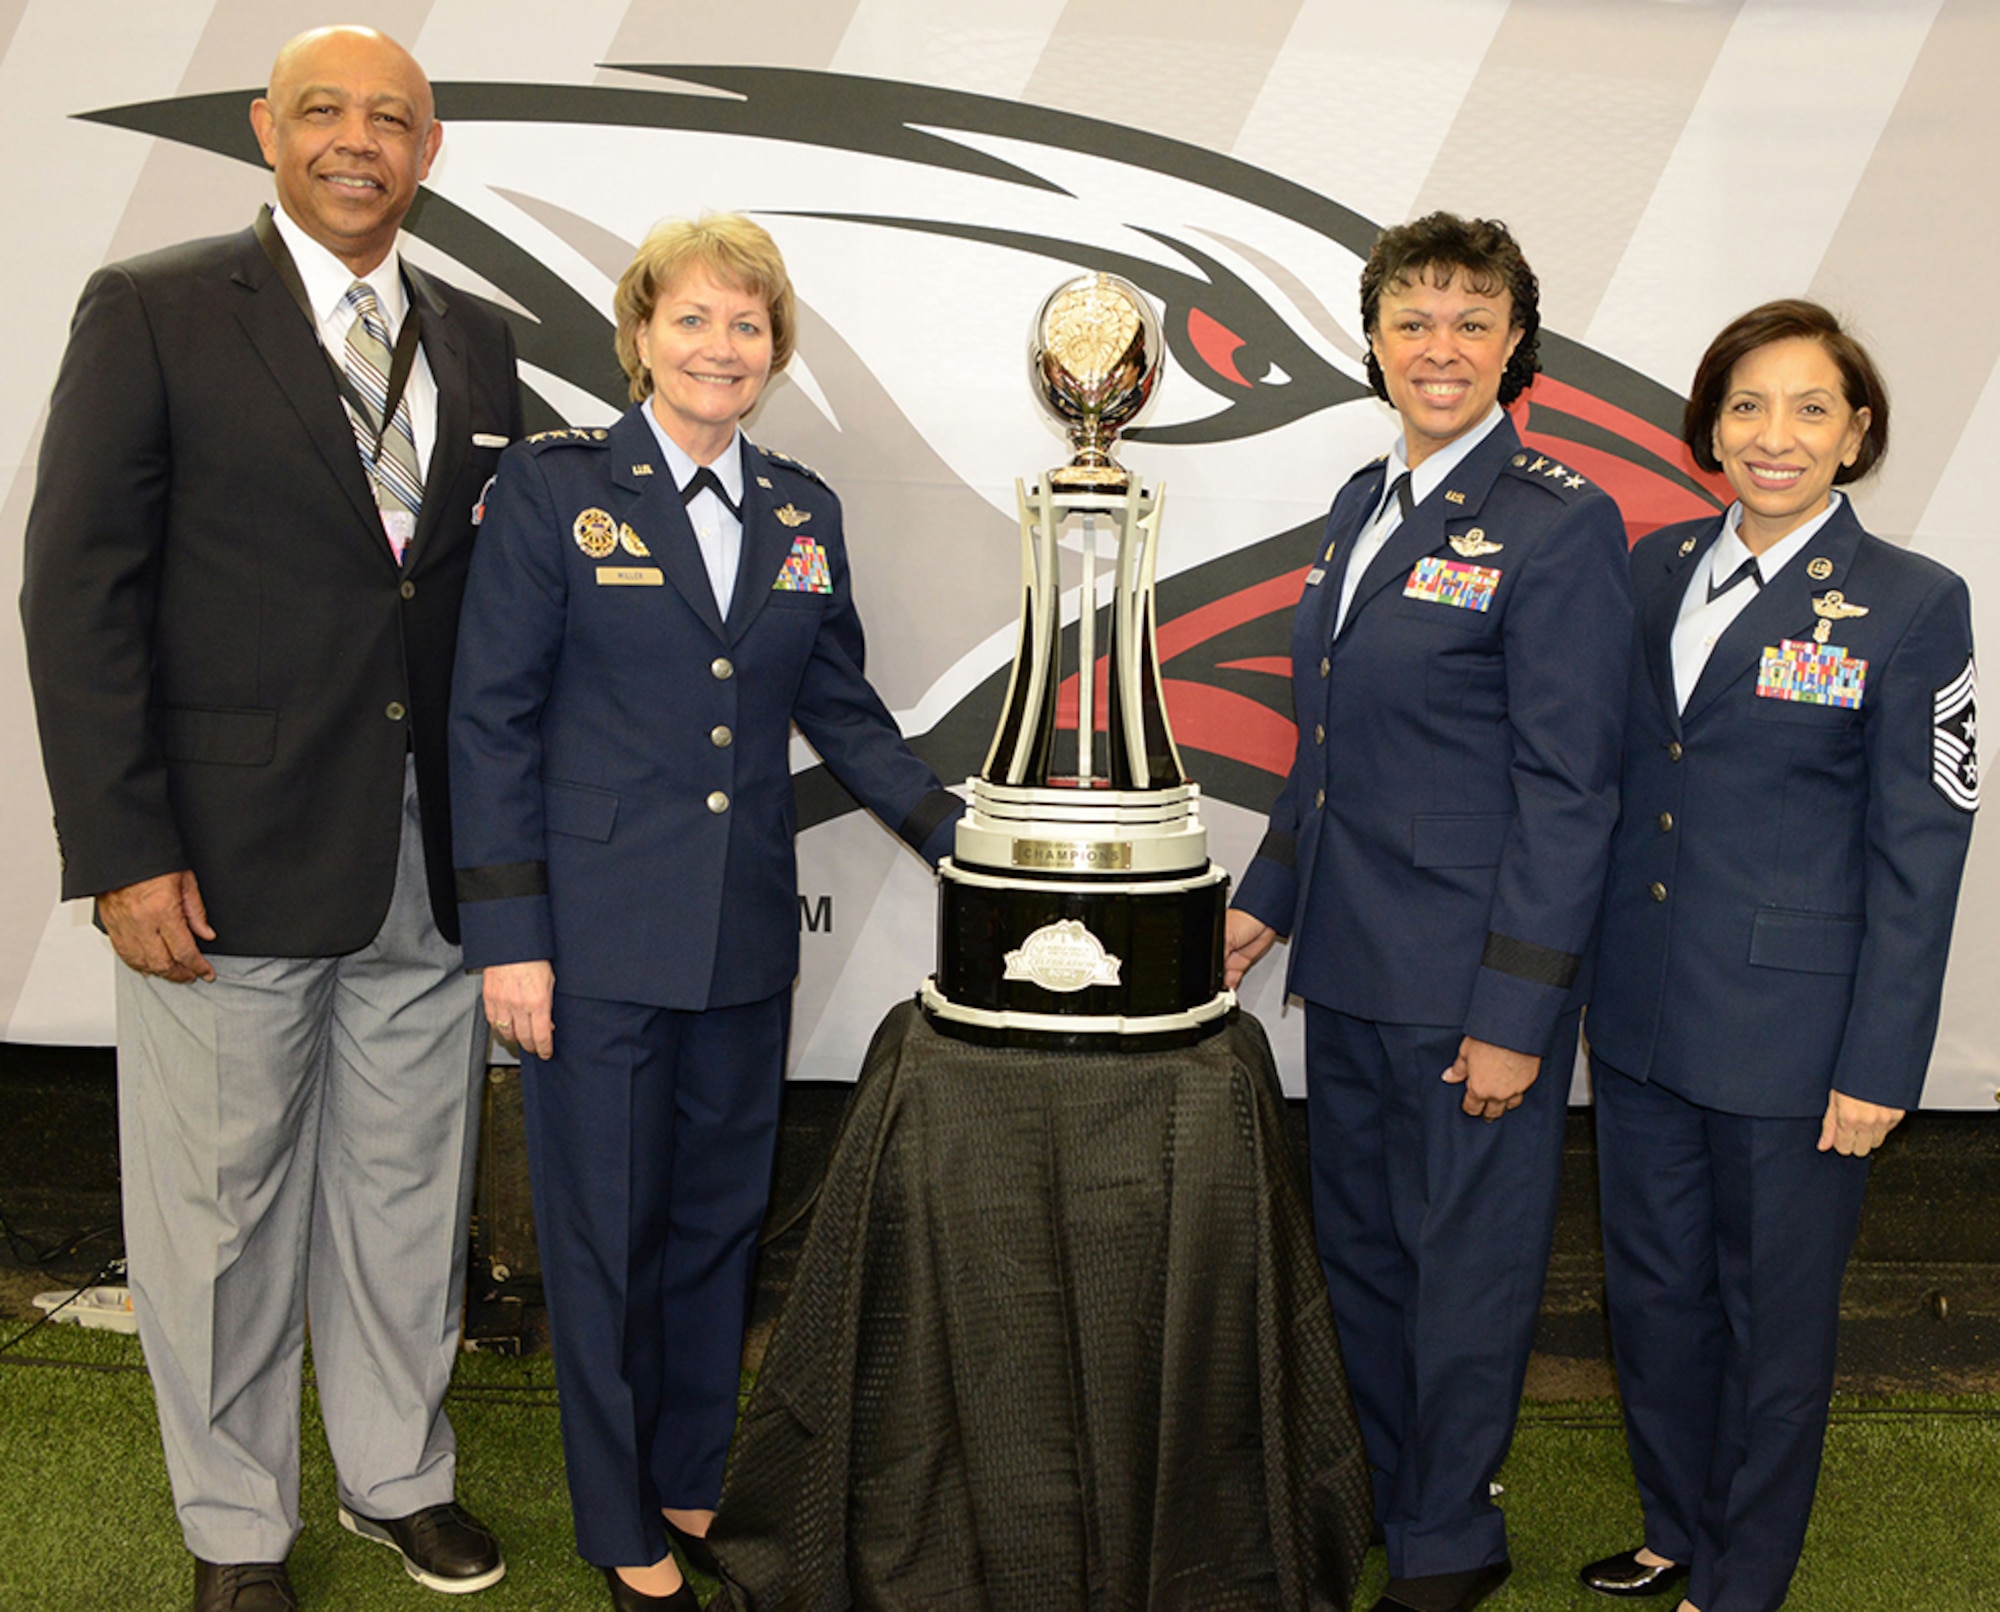 (Left to right) John T. Grant, Air Force Reserve Celebration Bowl executive director; Lt. Gen. Maryanne Miller, chief of the Air Force Reserve and commander of Air Force Reserve Command; Lt. Gen. Stayce D. Harris, assistant vice chief of staff and director, Air Staff, Headquarters U.S. Air Force, Washington D.C.; and Chief Master Sgt. Ericka Kelly, Air Force Reserve Command command chief, pose with the Air Force Reserve Celebration Bowl trophy, which was presented to the Grambling State University Tigers, who defeated the North Carolina Central University Eagles by a score of 10-9. (U.S. Air Force photo/Master Sgt. Chance Babin)